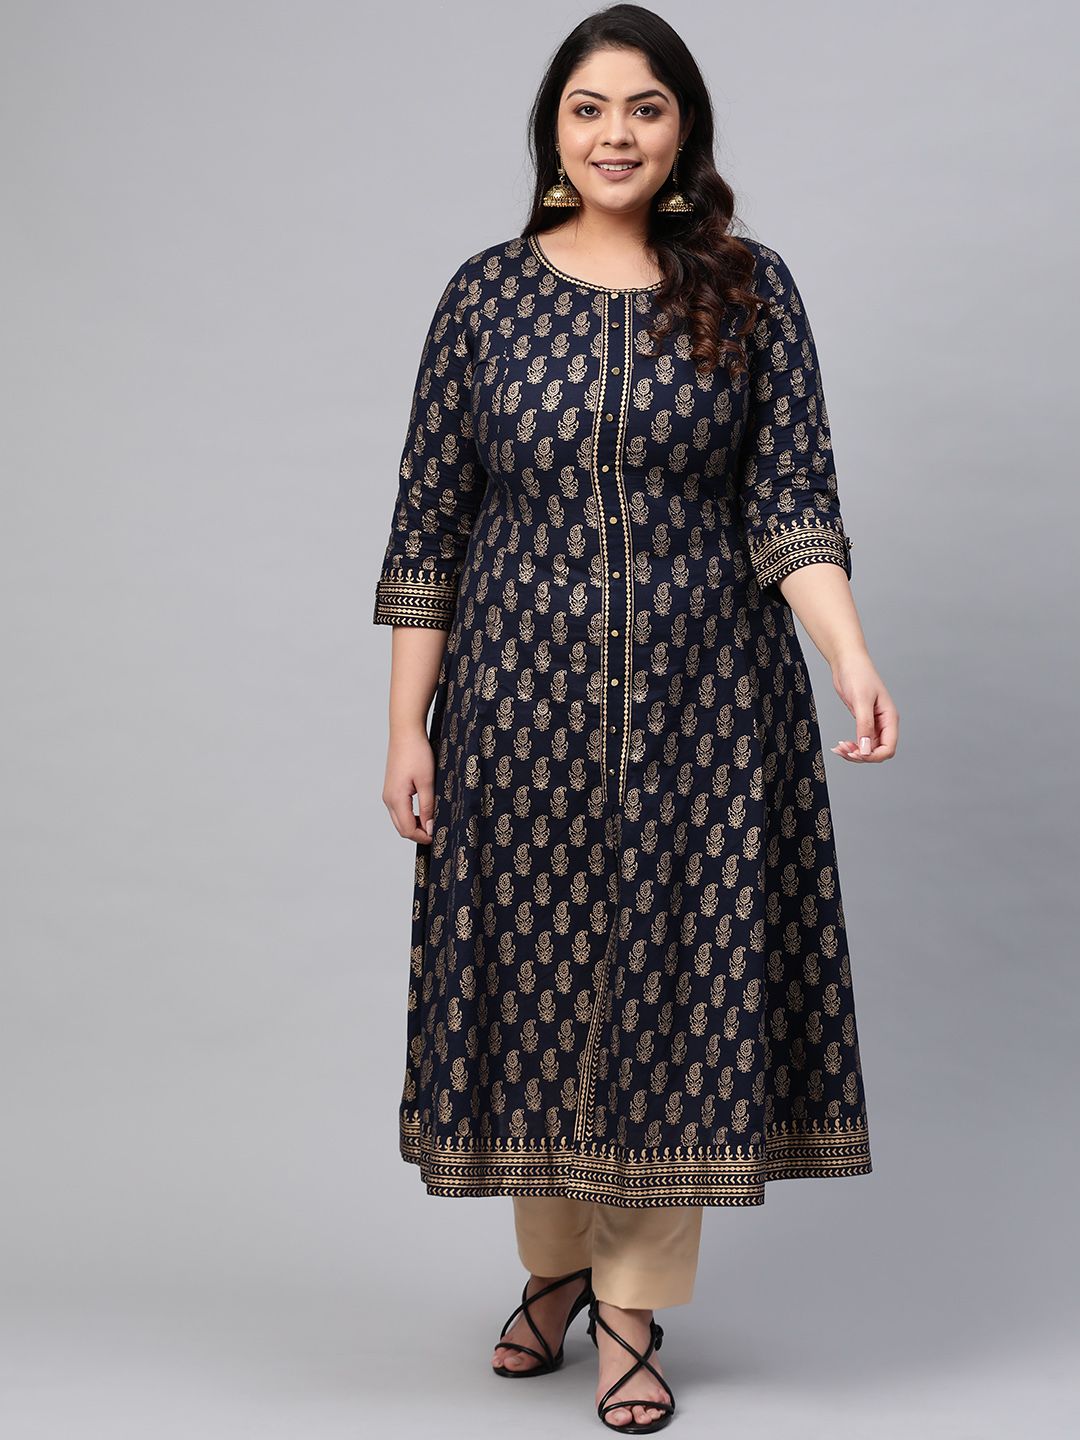 YASH GALLERY Women Plus Size Navy Blue & Golden Printed A-Line Kurta Price in India